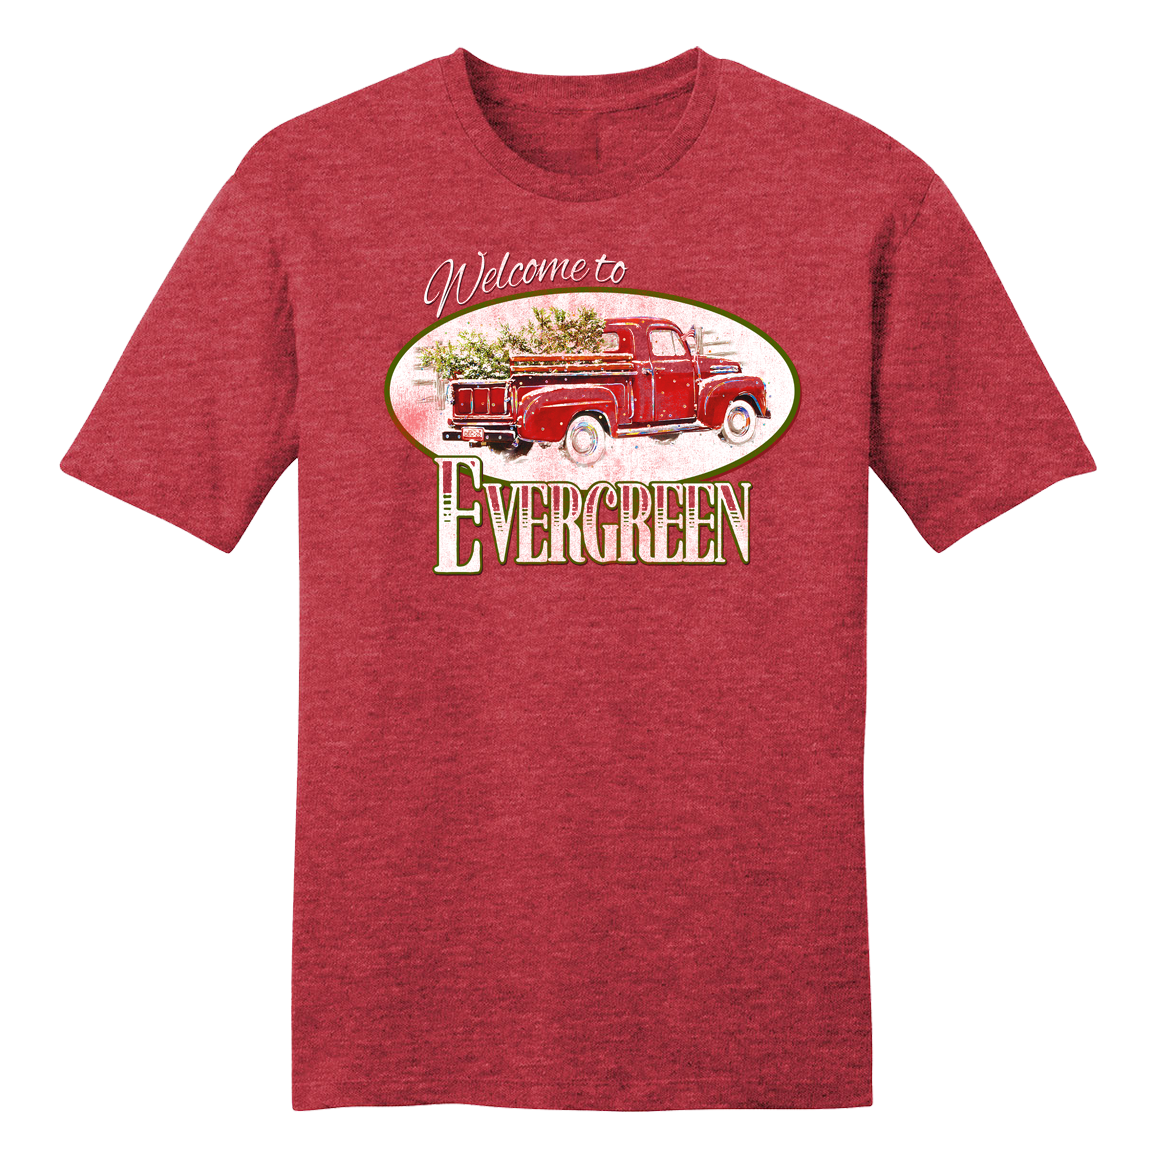 Welcome to Evergreen Truck T-shirt